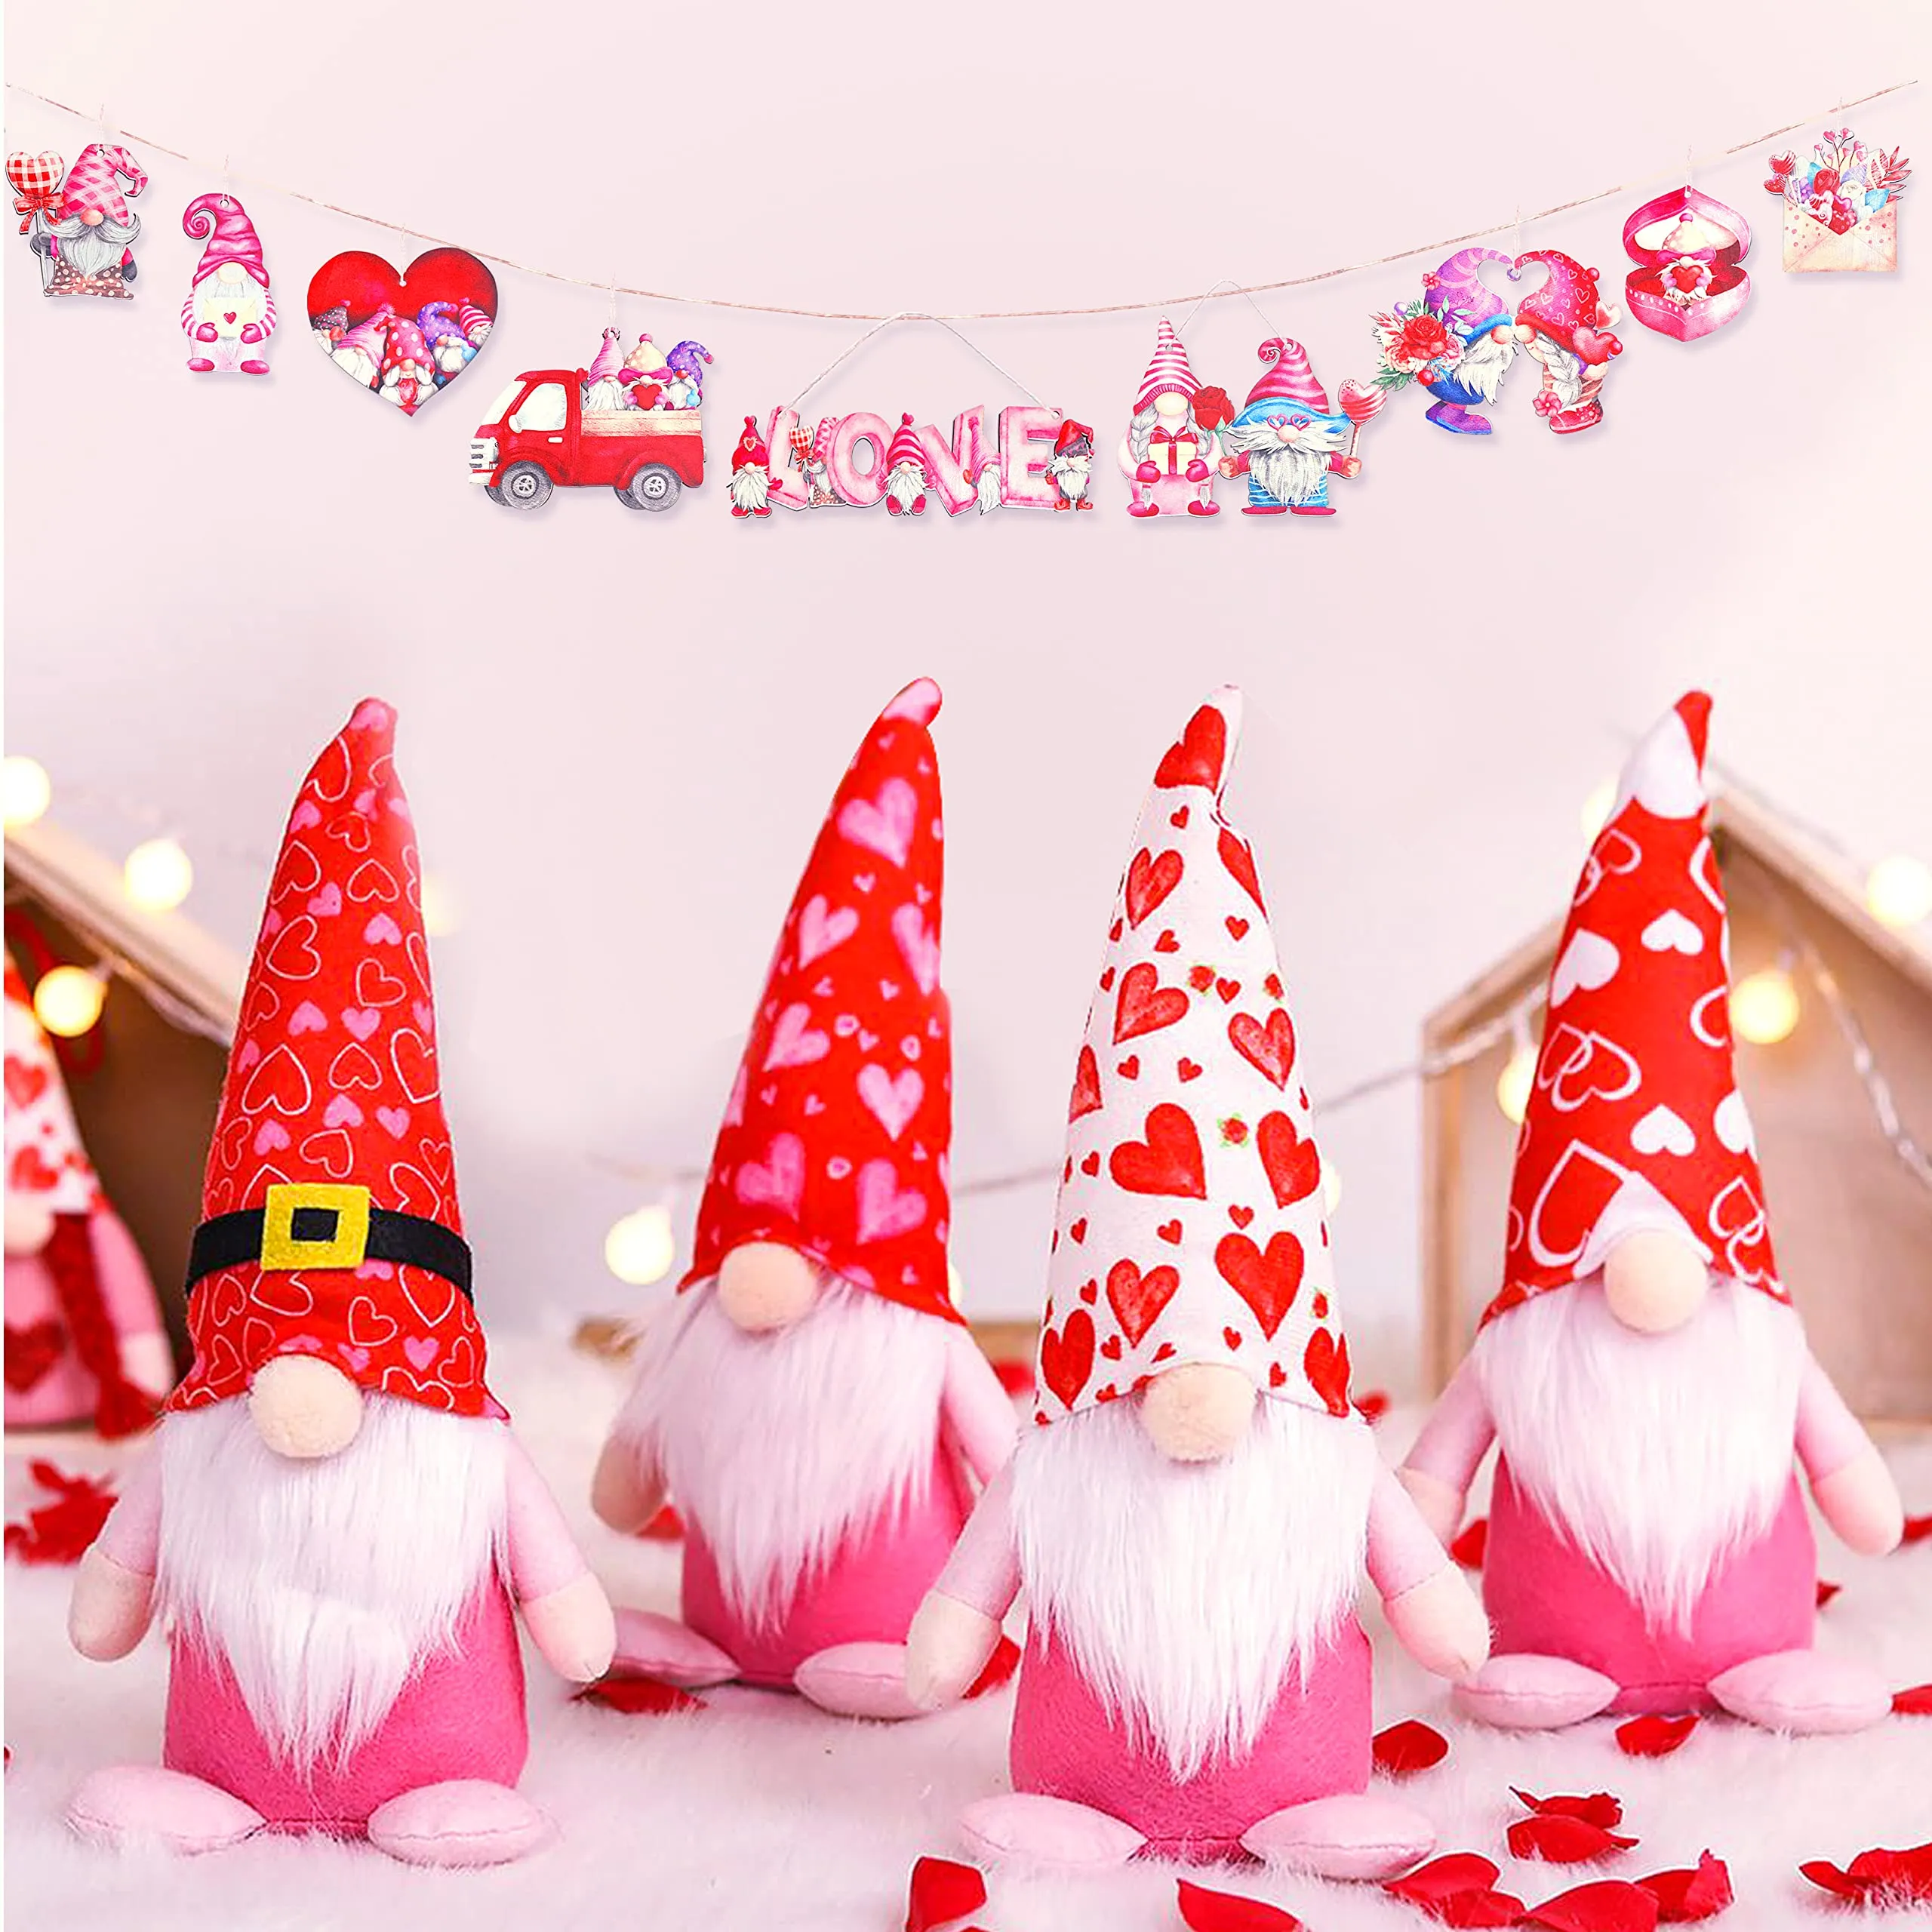 valentines day decorations gnome tree ornaments love sign adorable gnome couple red truck heart wooden happy valentines ornaments banner pendant for valentines day party decorations supplies